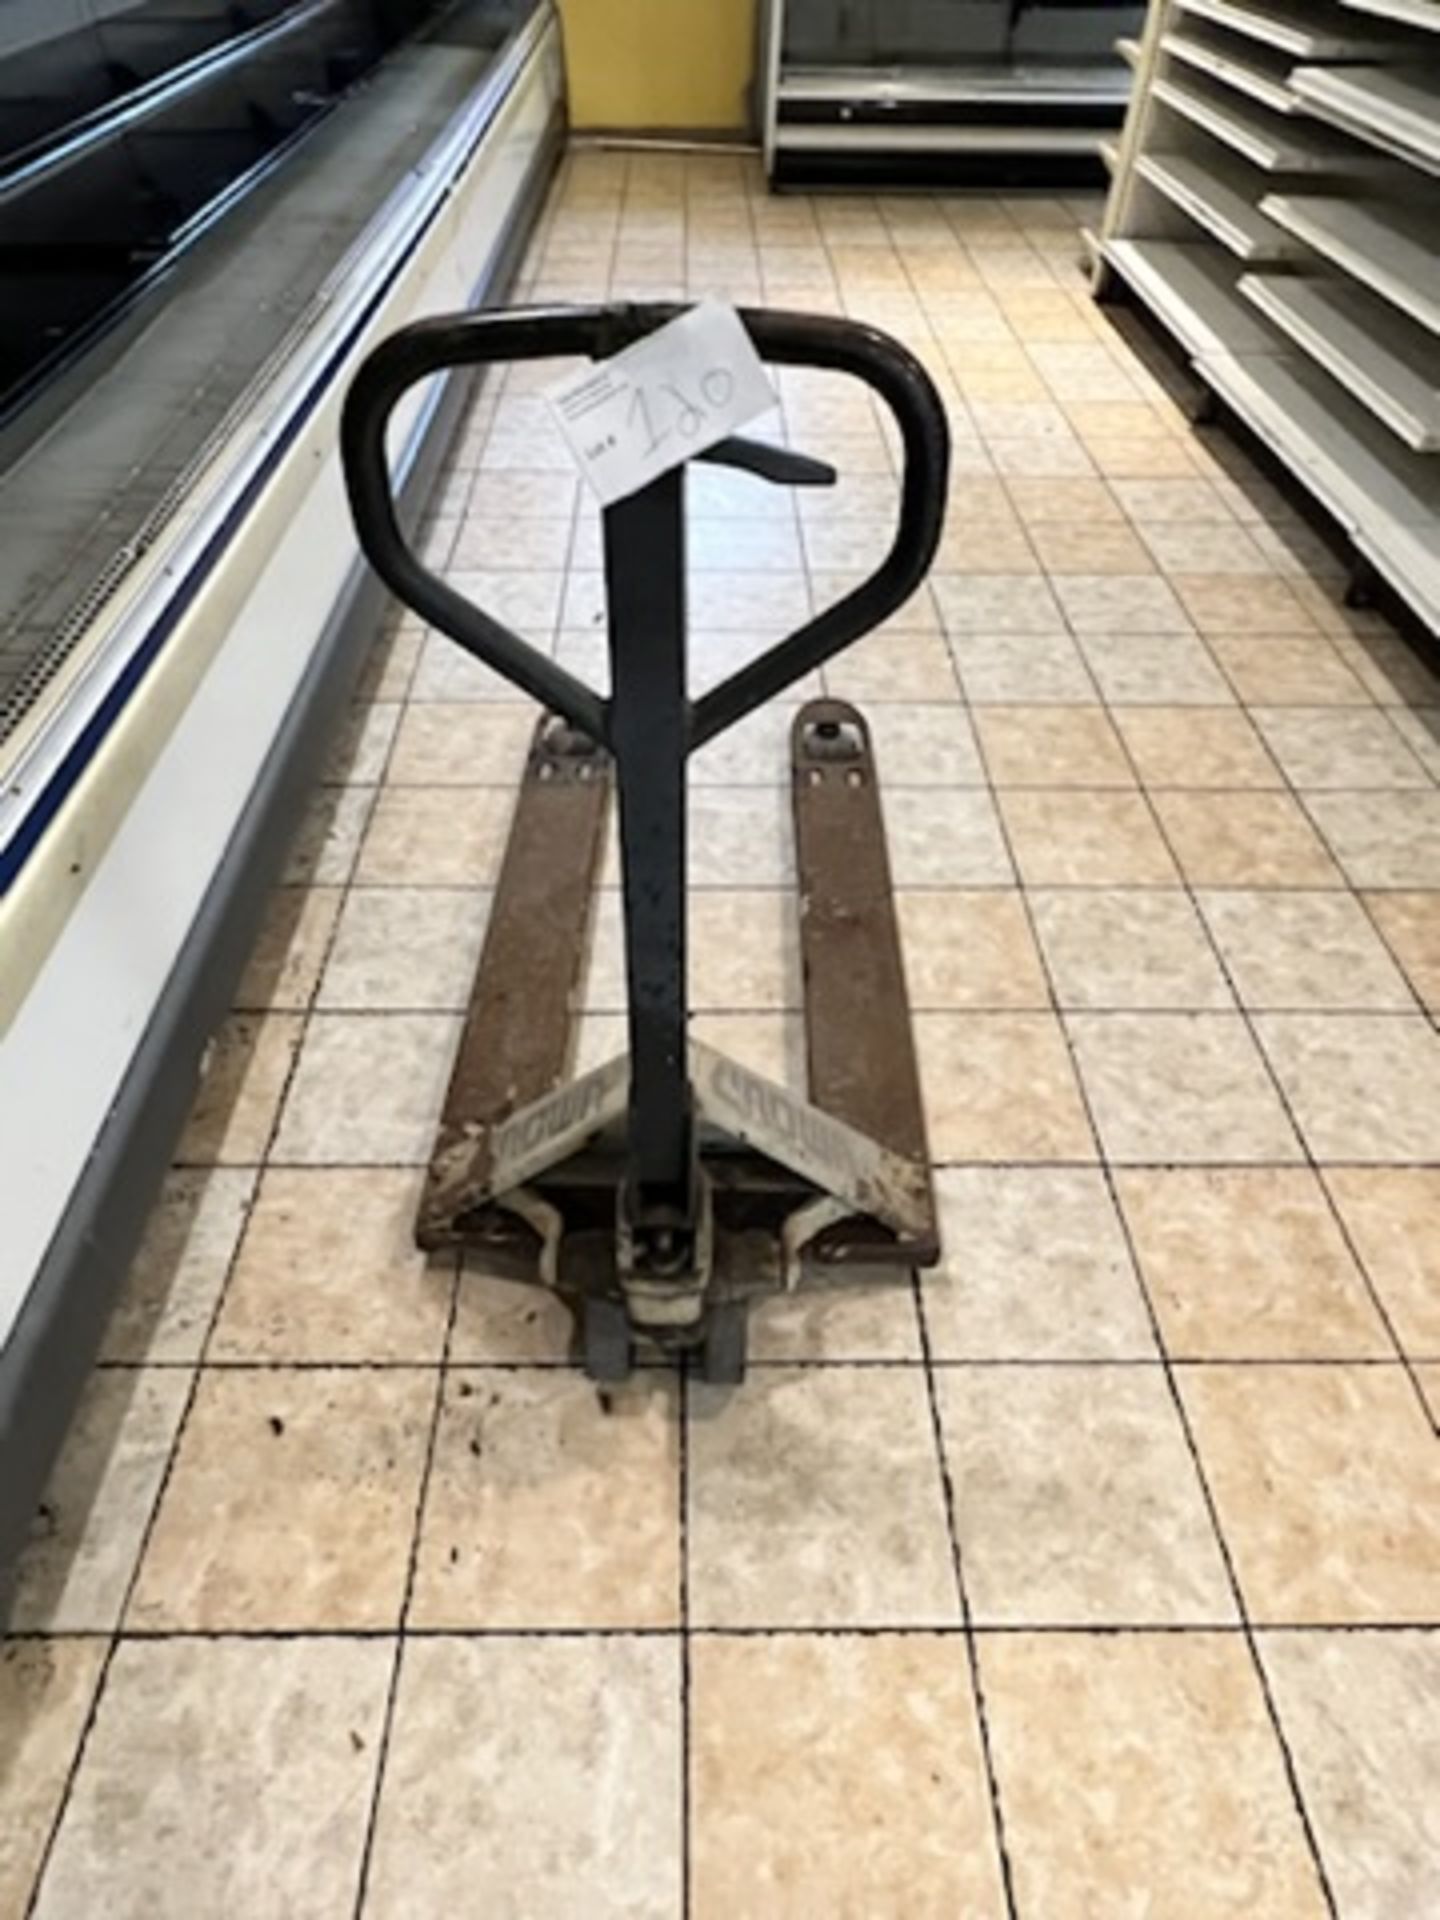 Crown Manual Pallet Jack, operational w/ signs of visible rust.